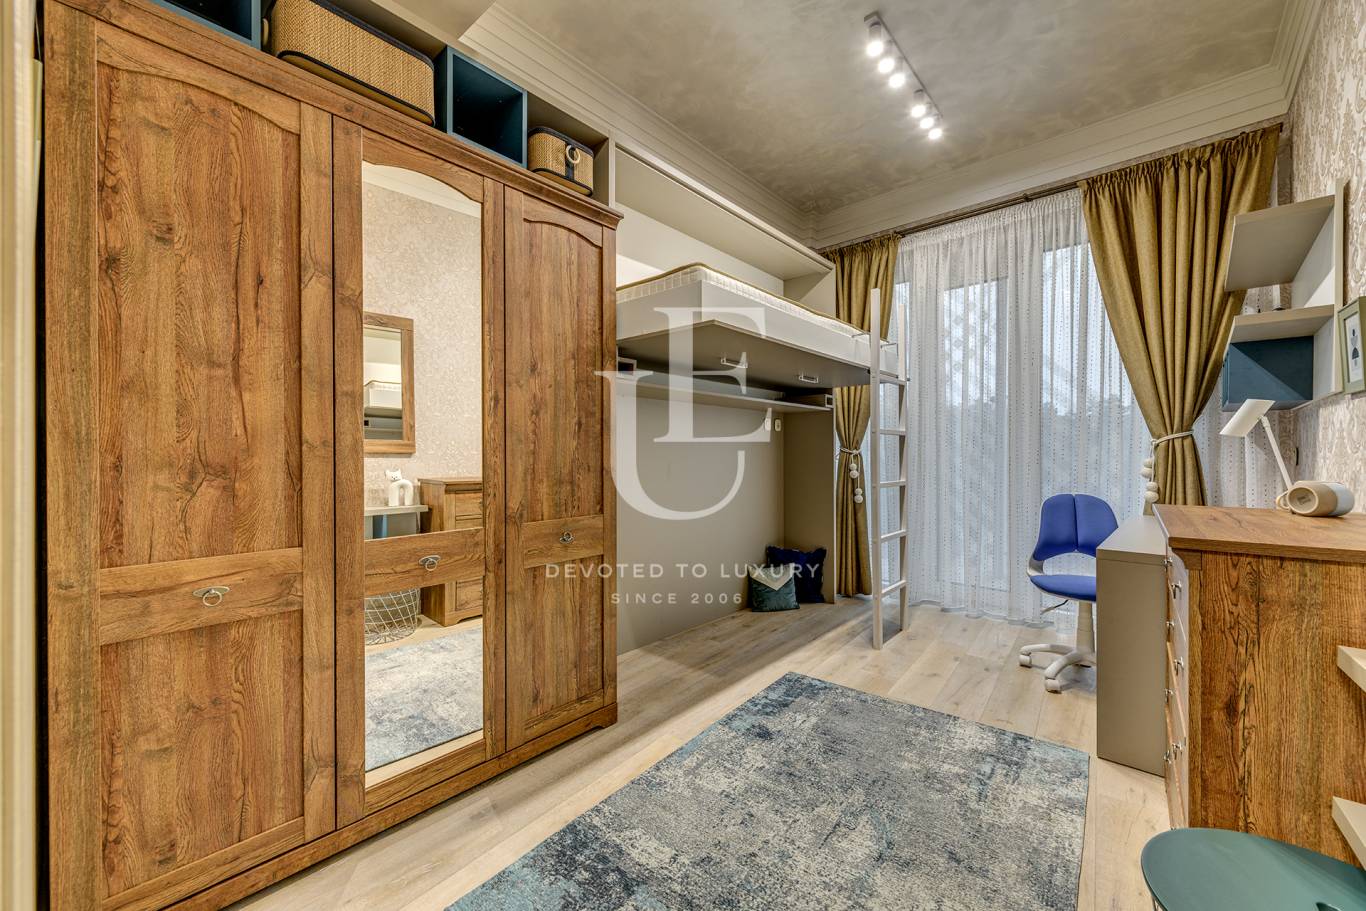 Apartment for sale in Sofia, Lozenets with listing ID: K7410 - image 4